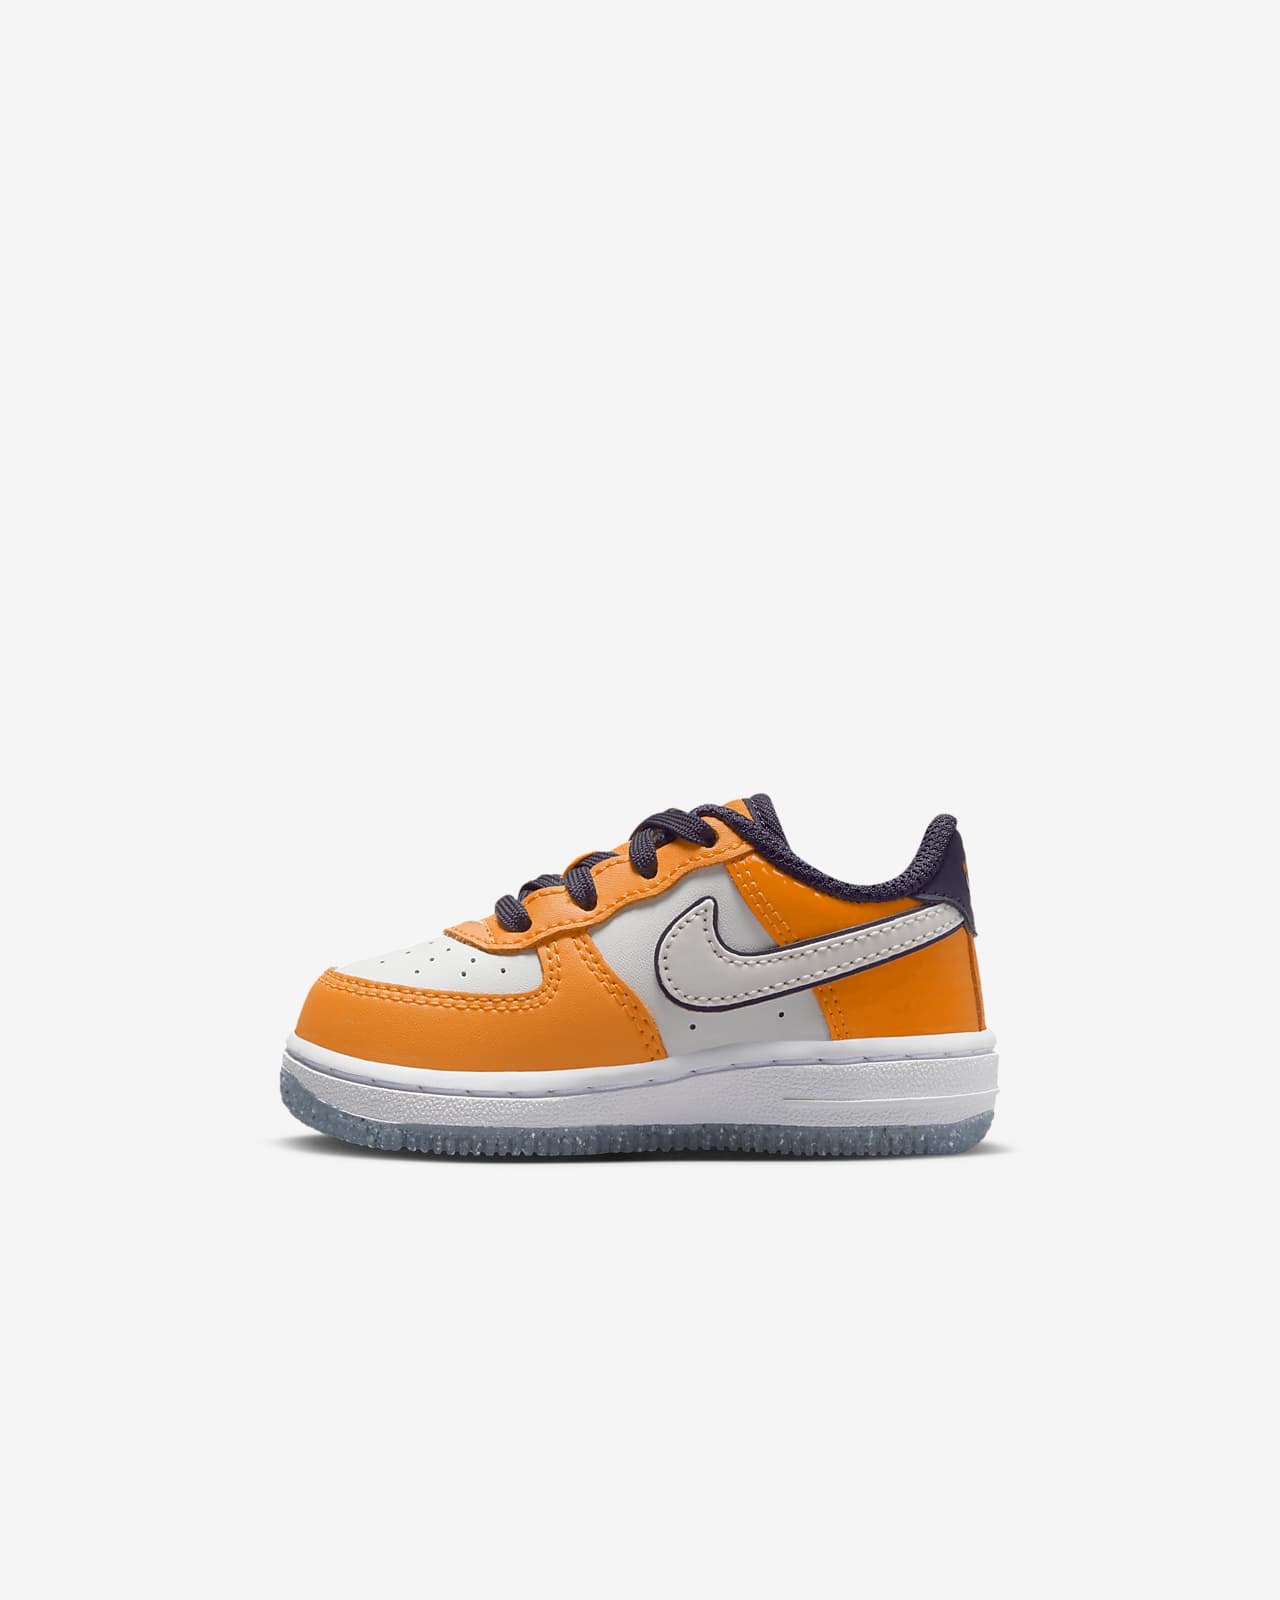 Orange Air Force 1 Shoes. Nike IN